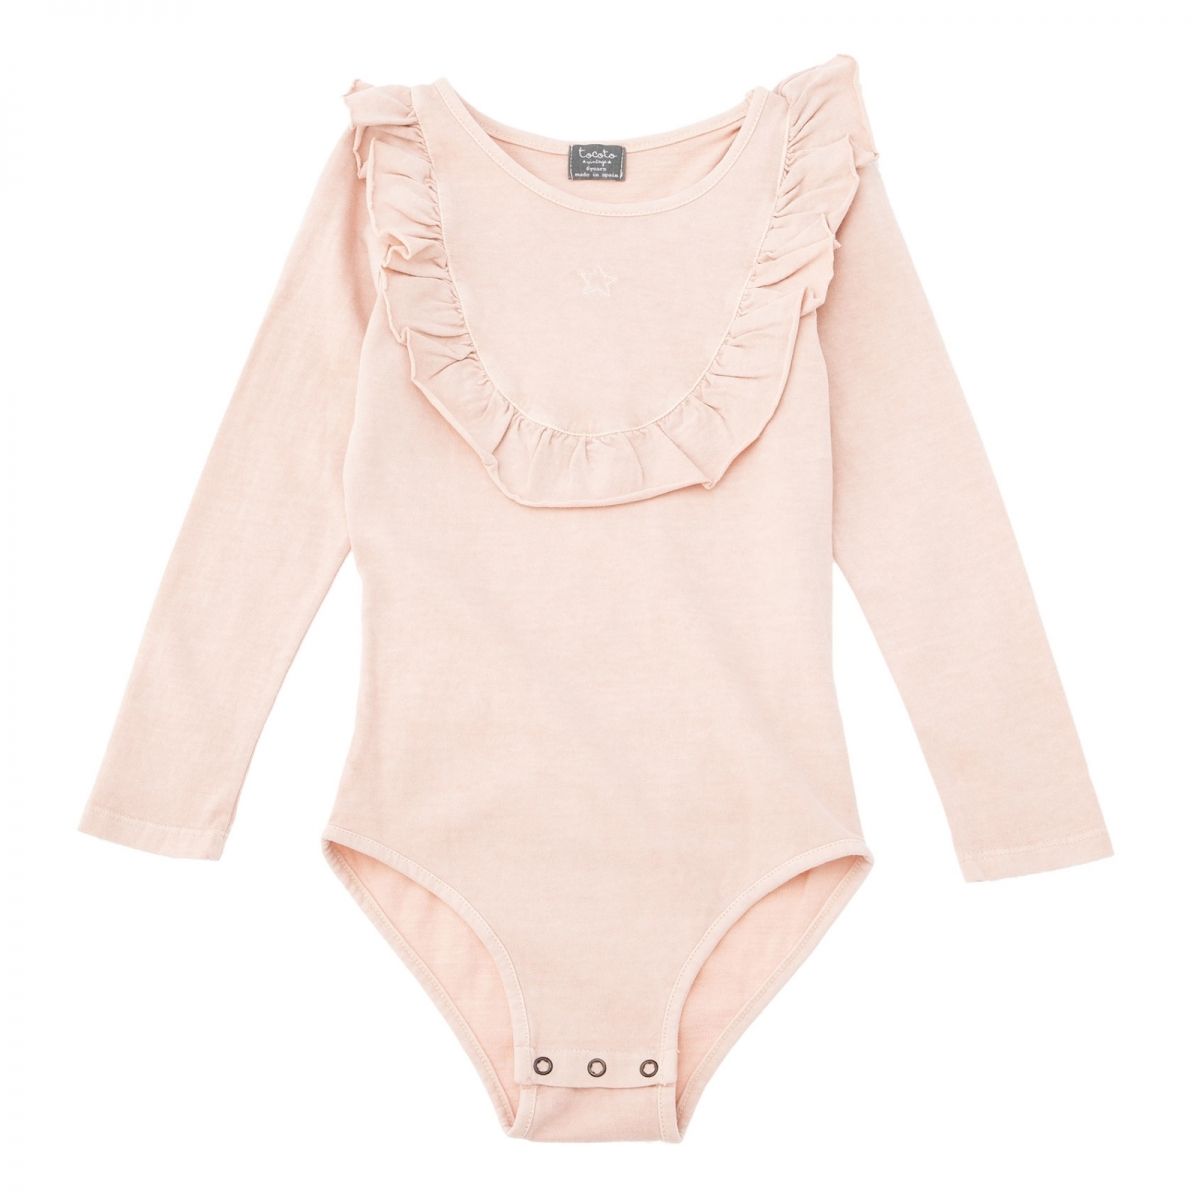 Tocoto Vintage - Jersey body with frill pink - Corps et sous-vêtements - W51819PINK 